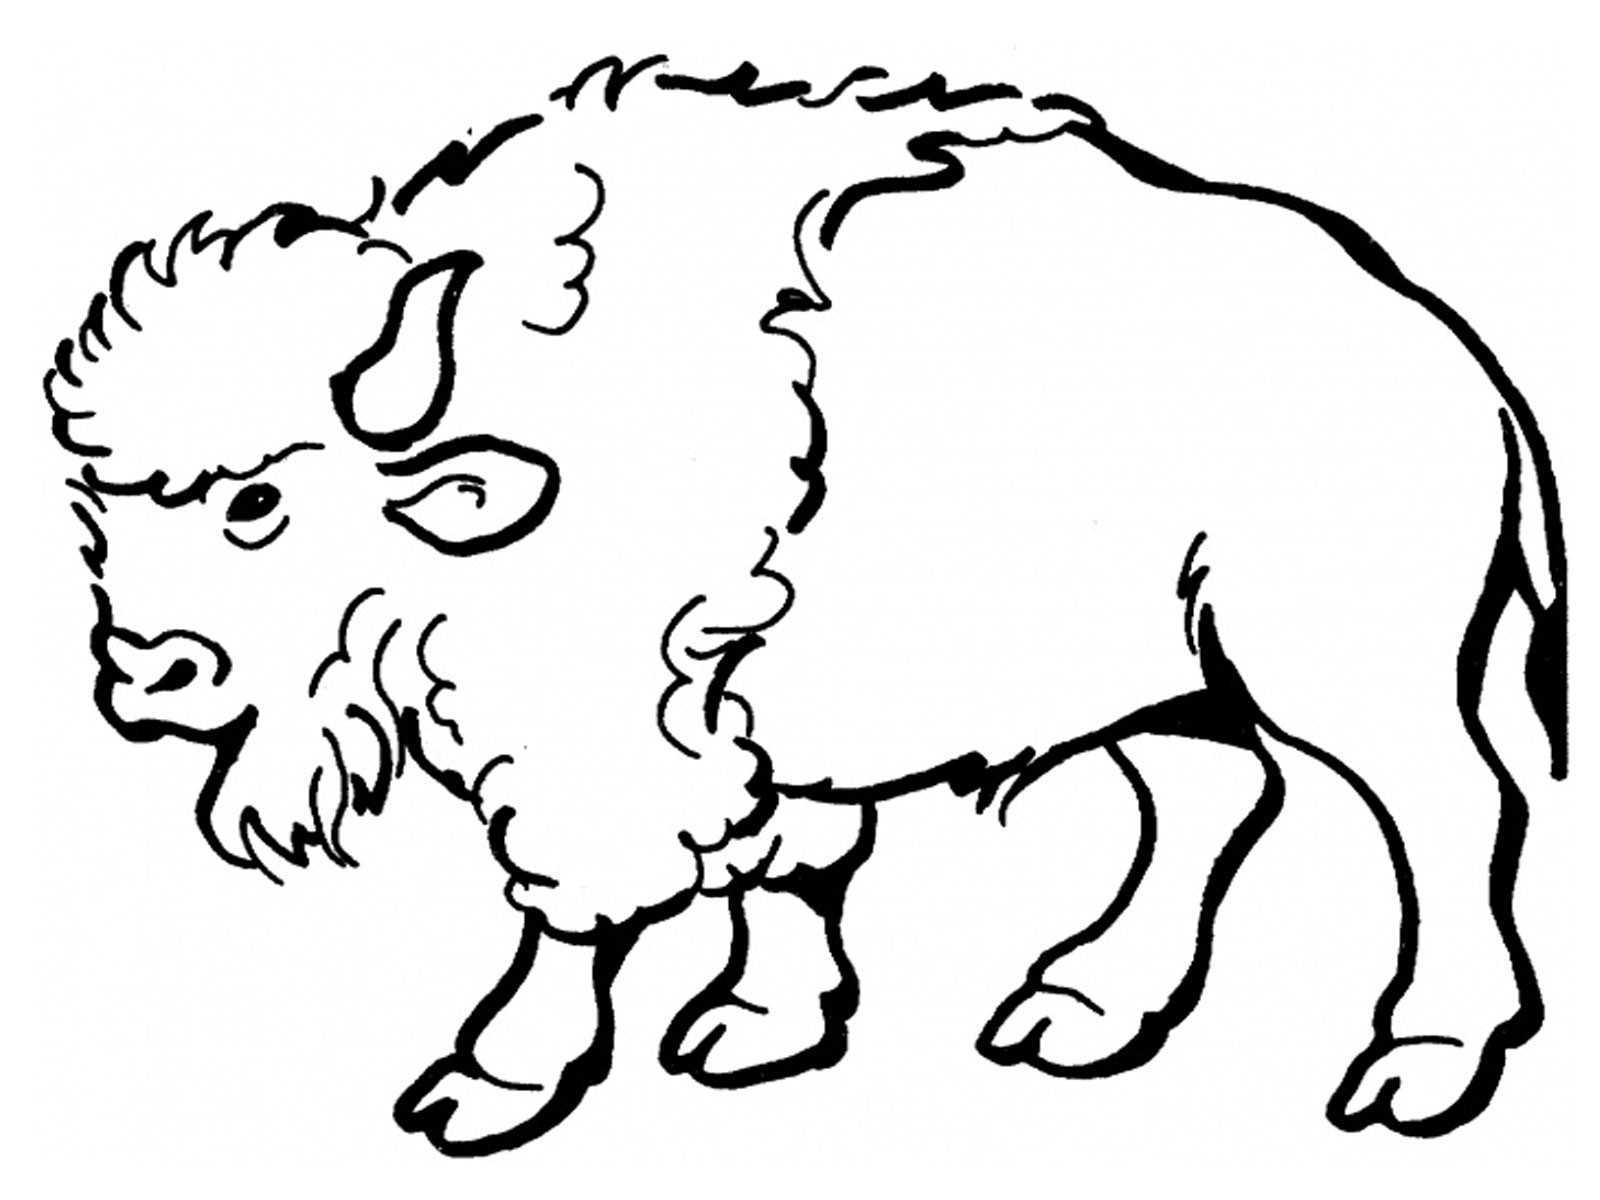 Bison Coloring Pages For Kids | Realistic Coloring Pages - ClipArt ...